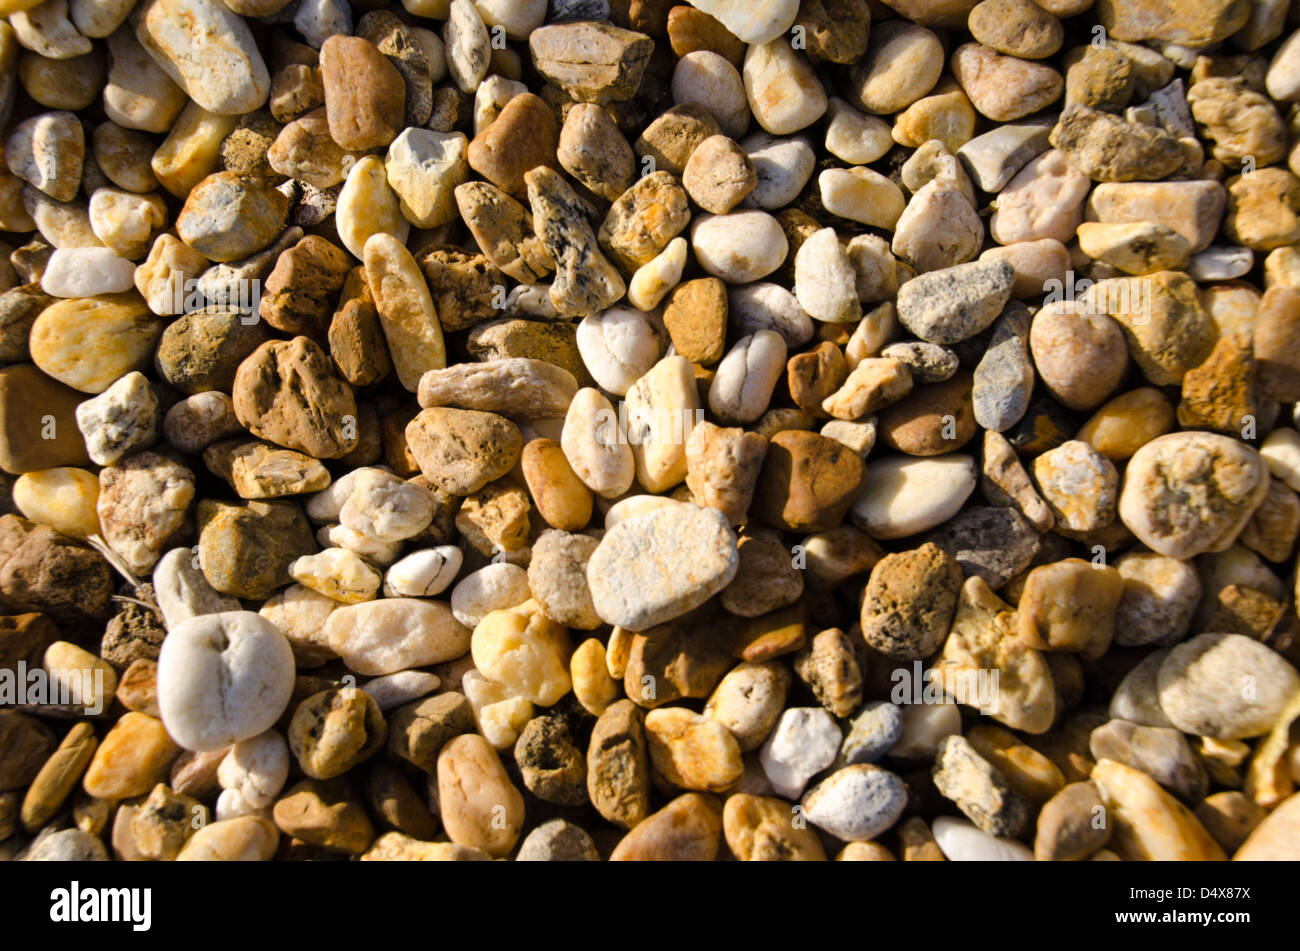 Sunny natural background texture featuring the bright orange, white and brown rocks and pebbles of a landscaped Florida home Stock Photo